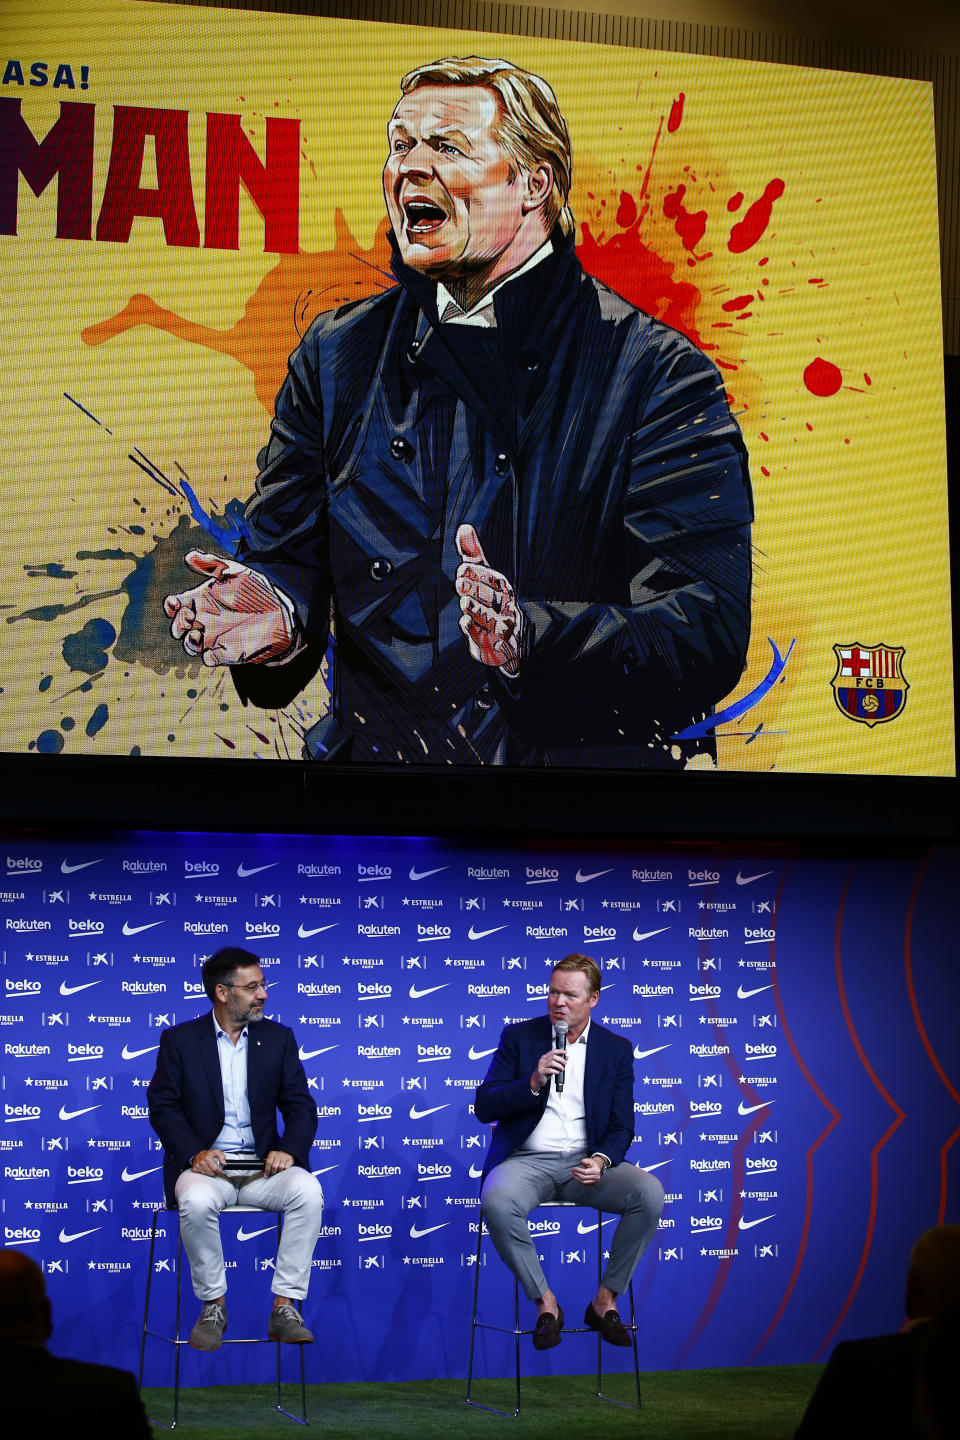 Ronald Koeman, right, speaks next to club Director Josep Bartome during his official presentation as coach for FC Barcelona in Barcelona, Spain, Wednesday, Aug. 19, 2020. Barcelona officially announced earlier on Wednesday a deal with Koeman to become their coach five days after the team's humiliating 8-2 loss to Bayern Munich in the Champions League quarterfinals. Barcelona says the former defender's deal runs through June 2022. Koeman replaces the fired Quique Setien. (AP Photo/Joan Monfort)